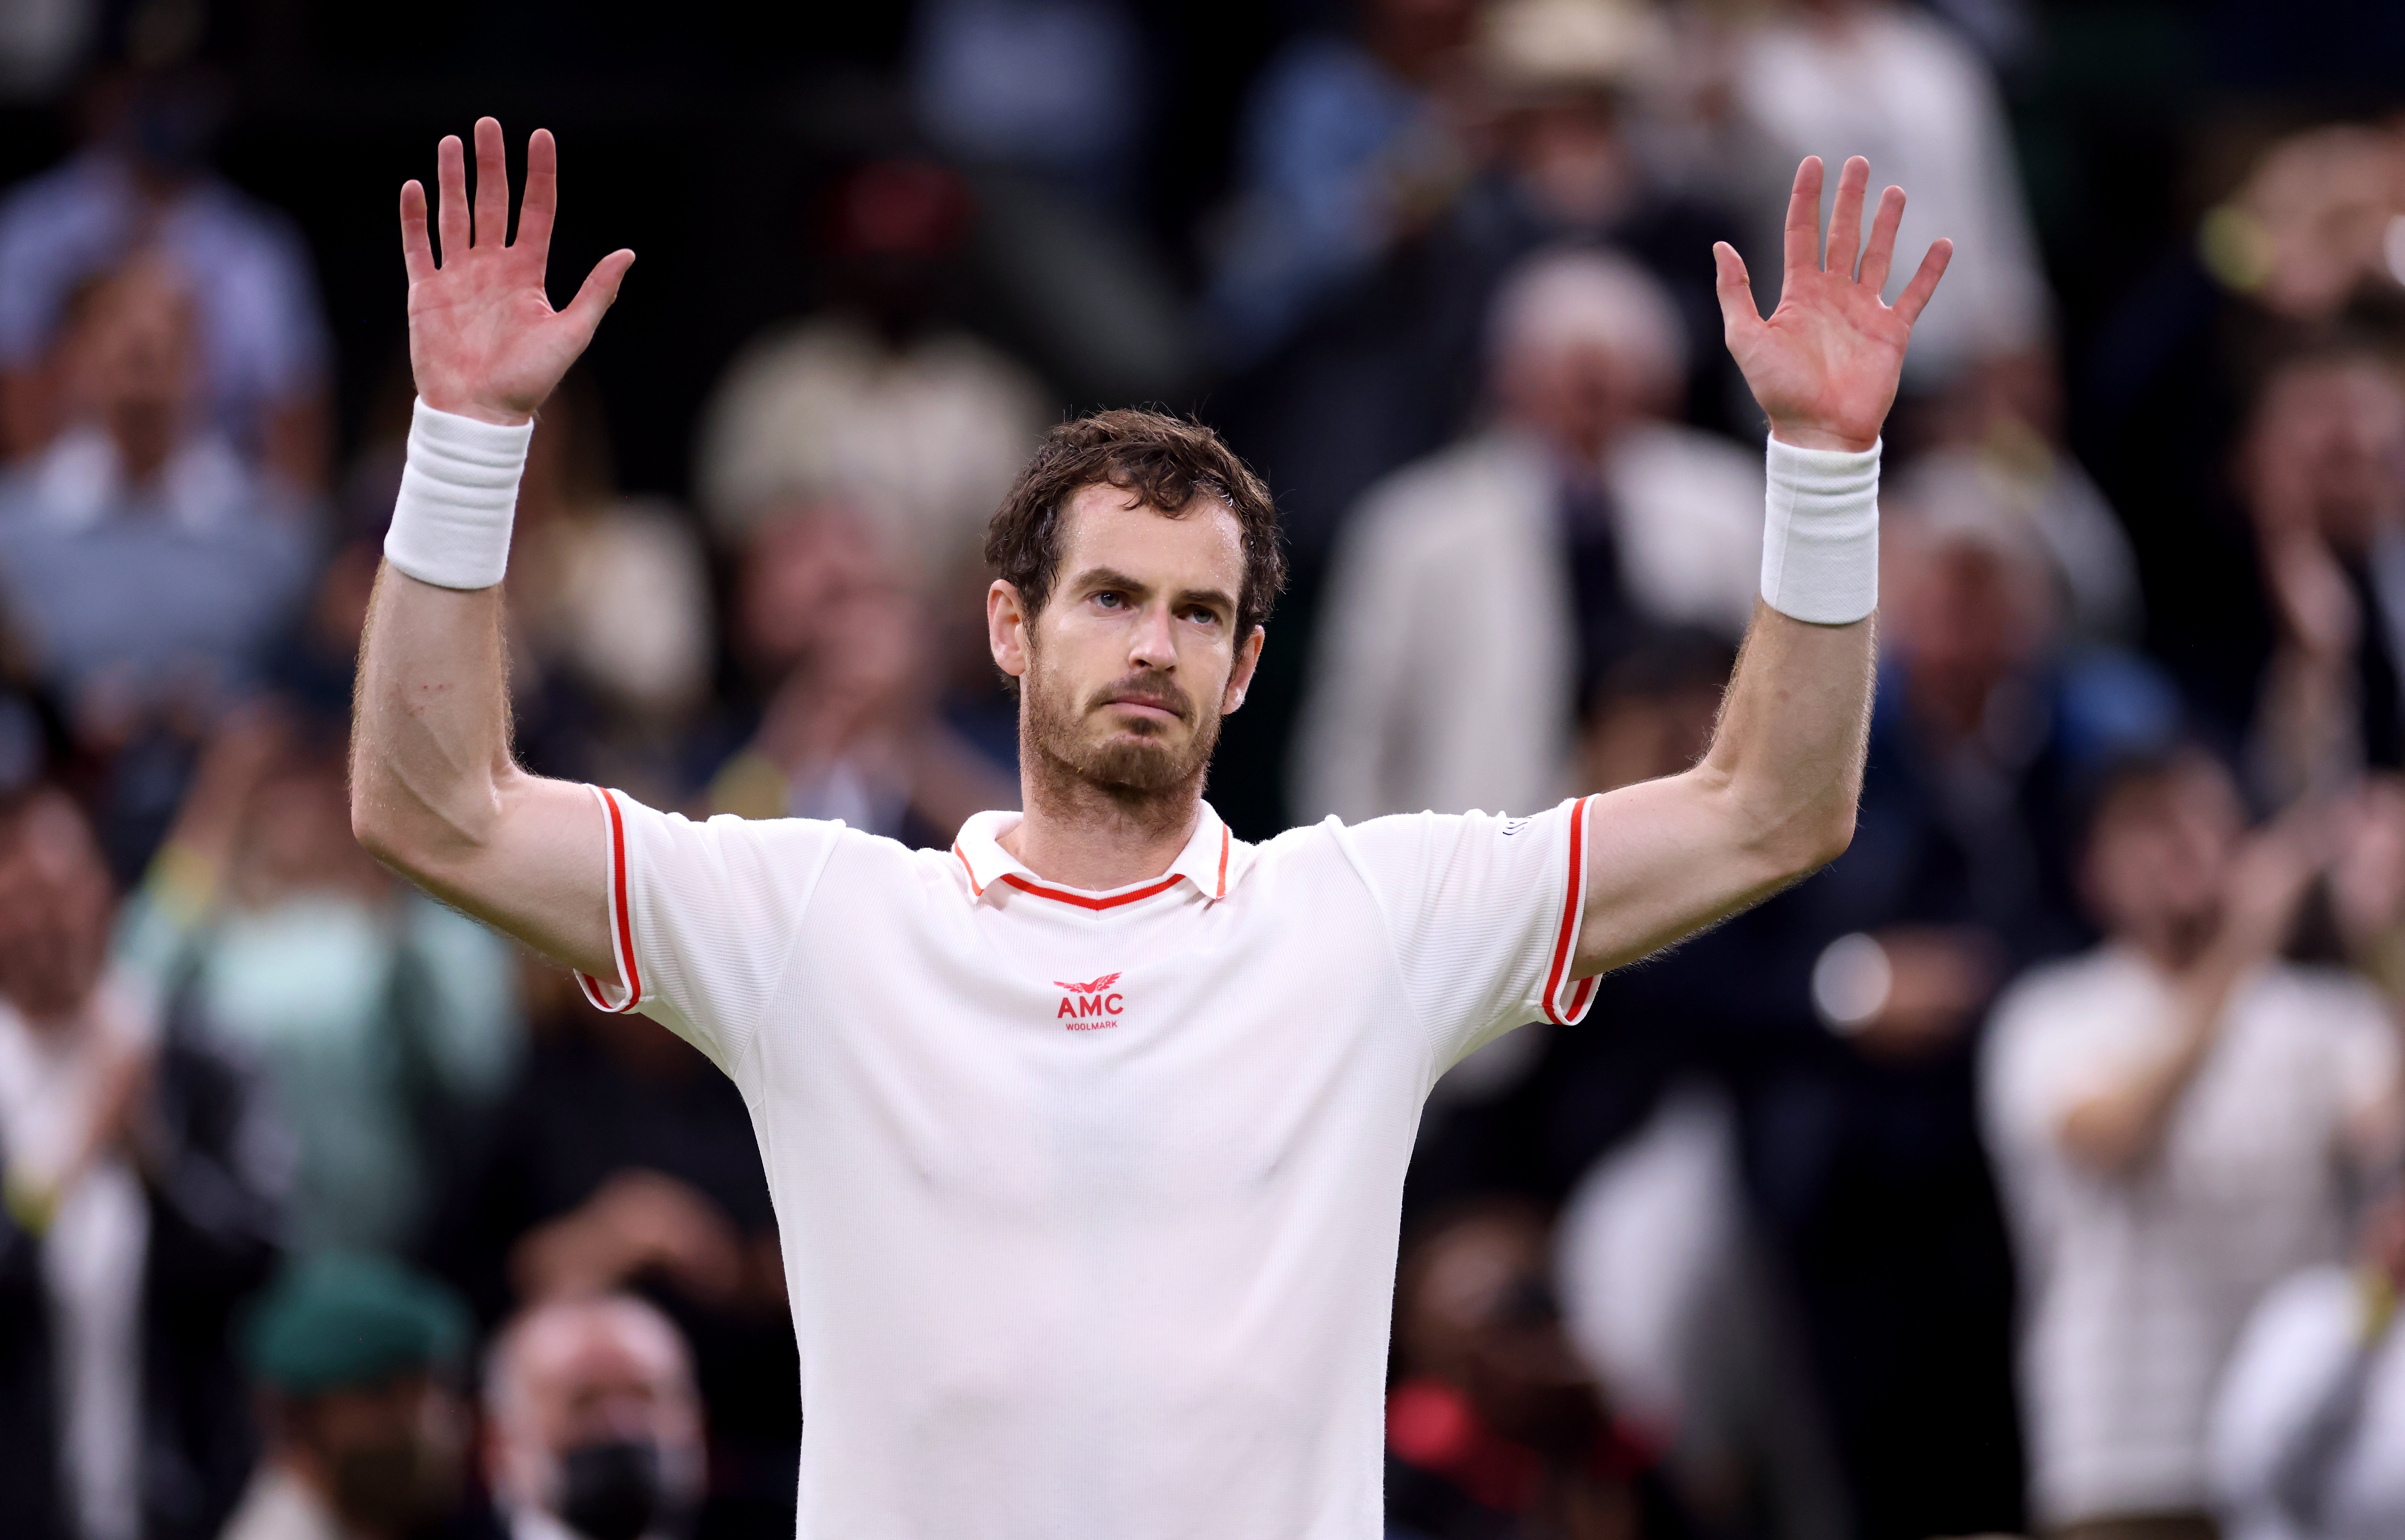 Andy Murray acknowledges the crowd